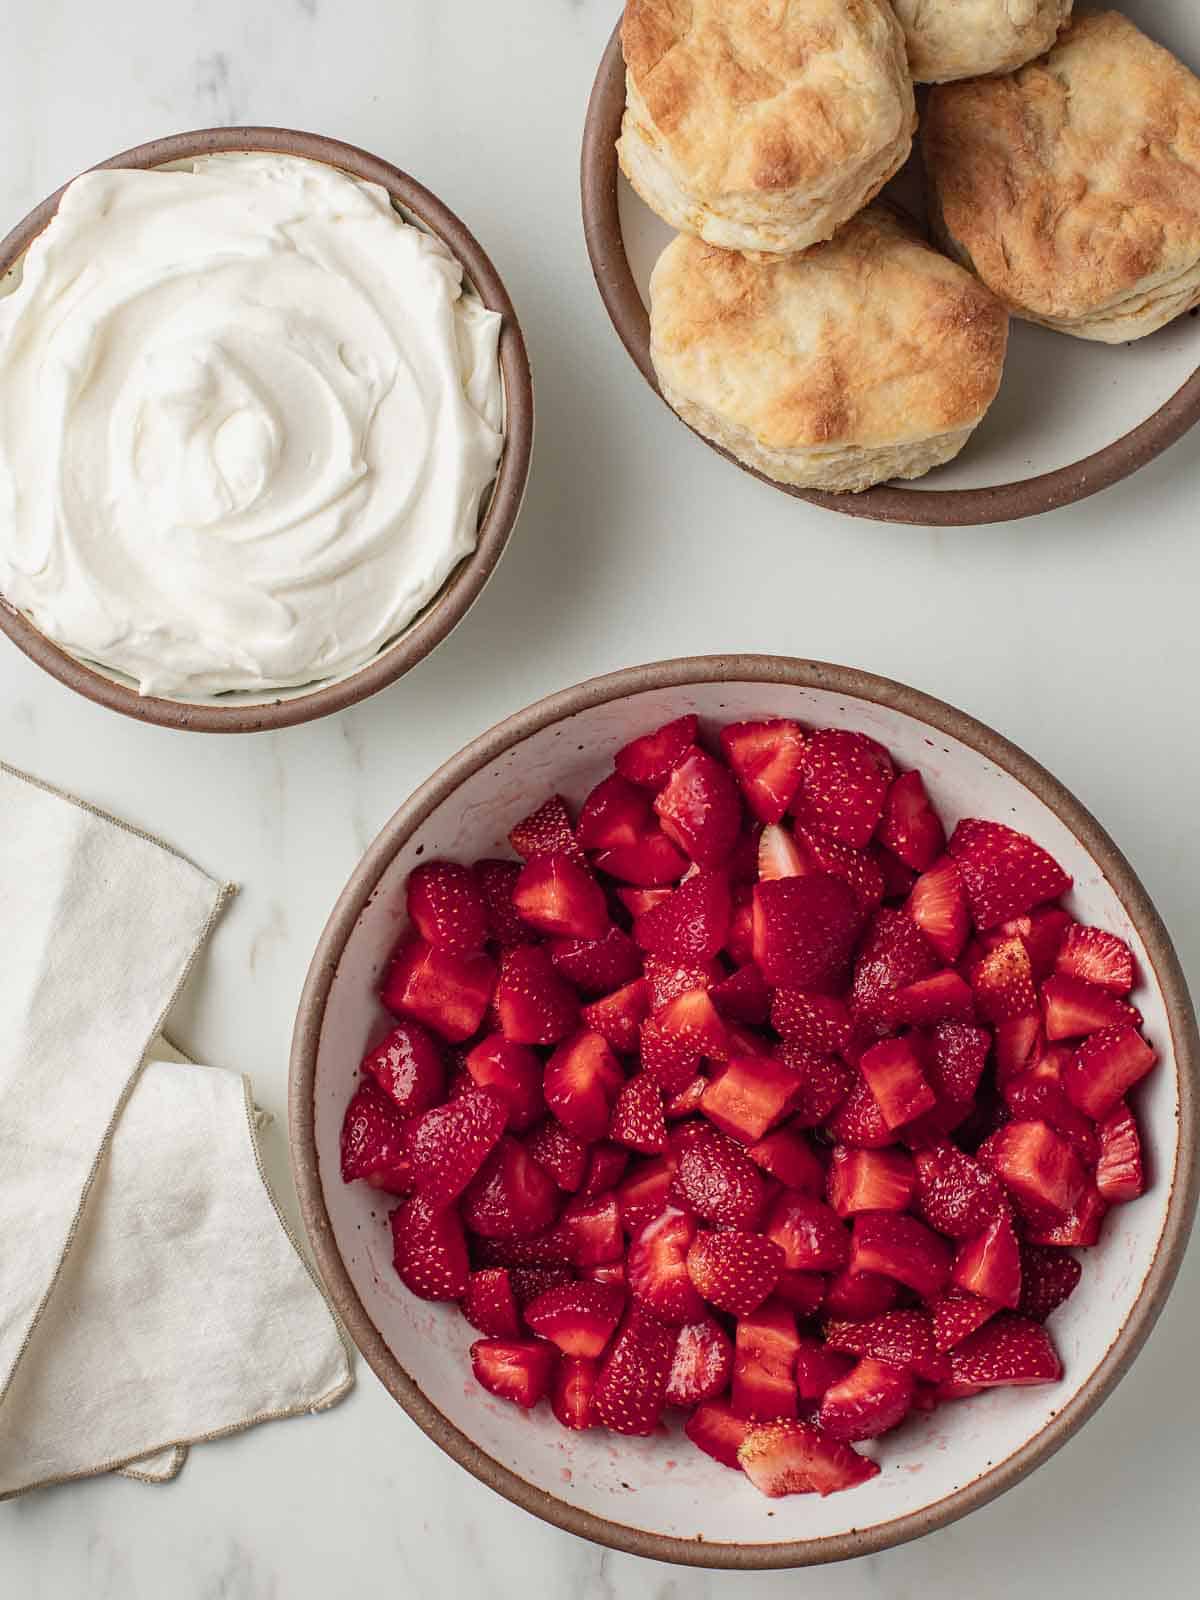 Three bowls with whipped cream strawberries and biscuits.